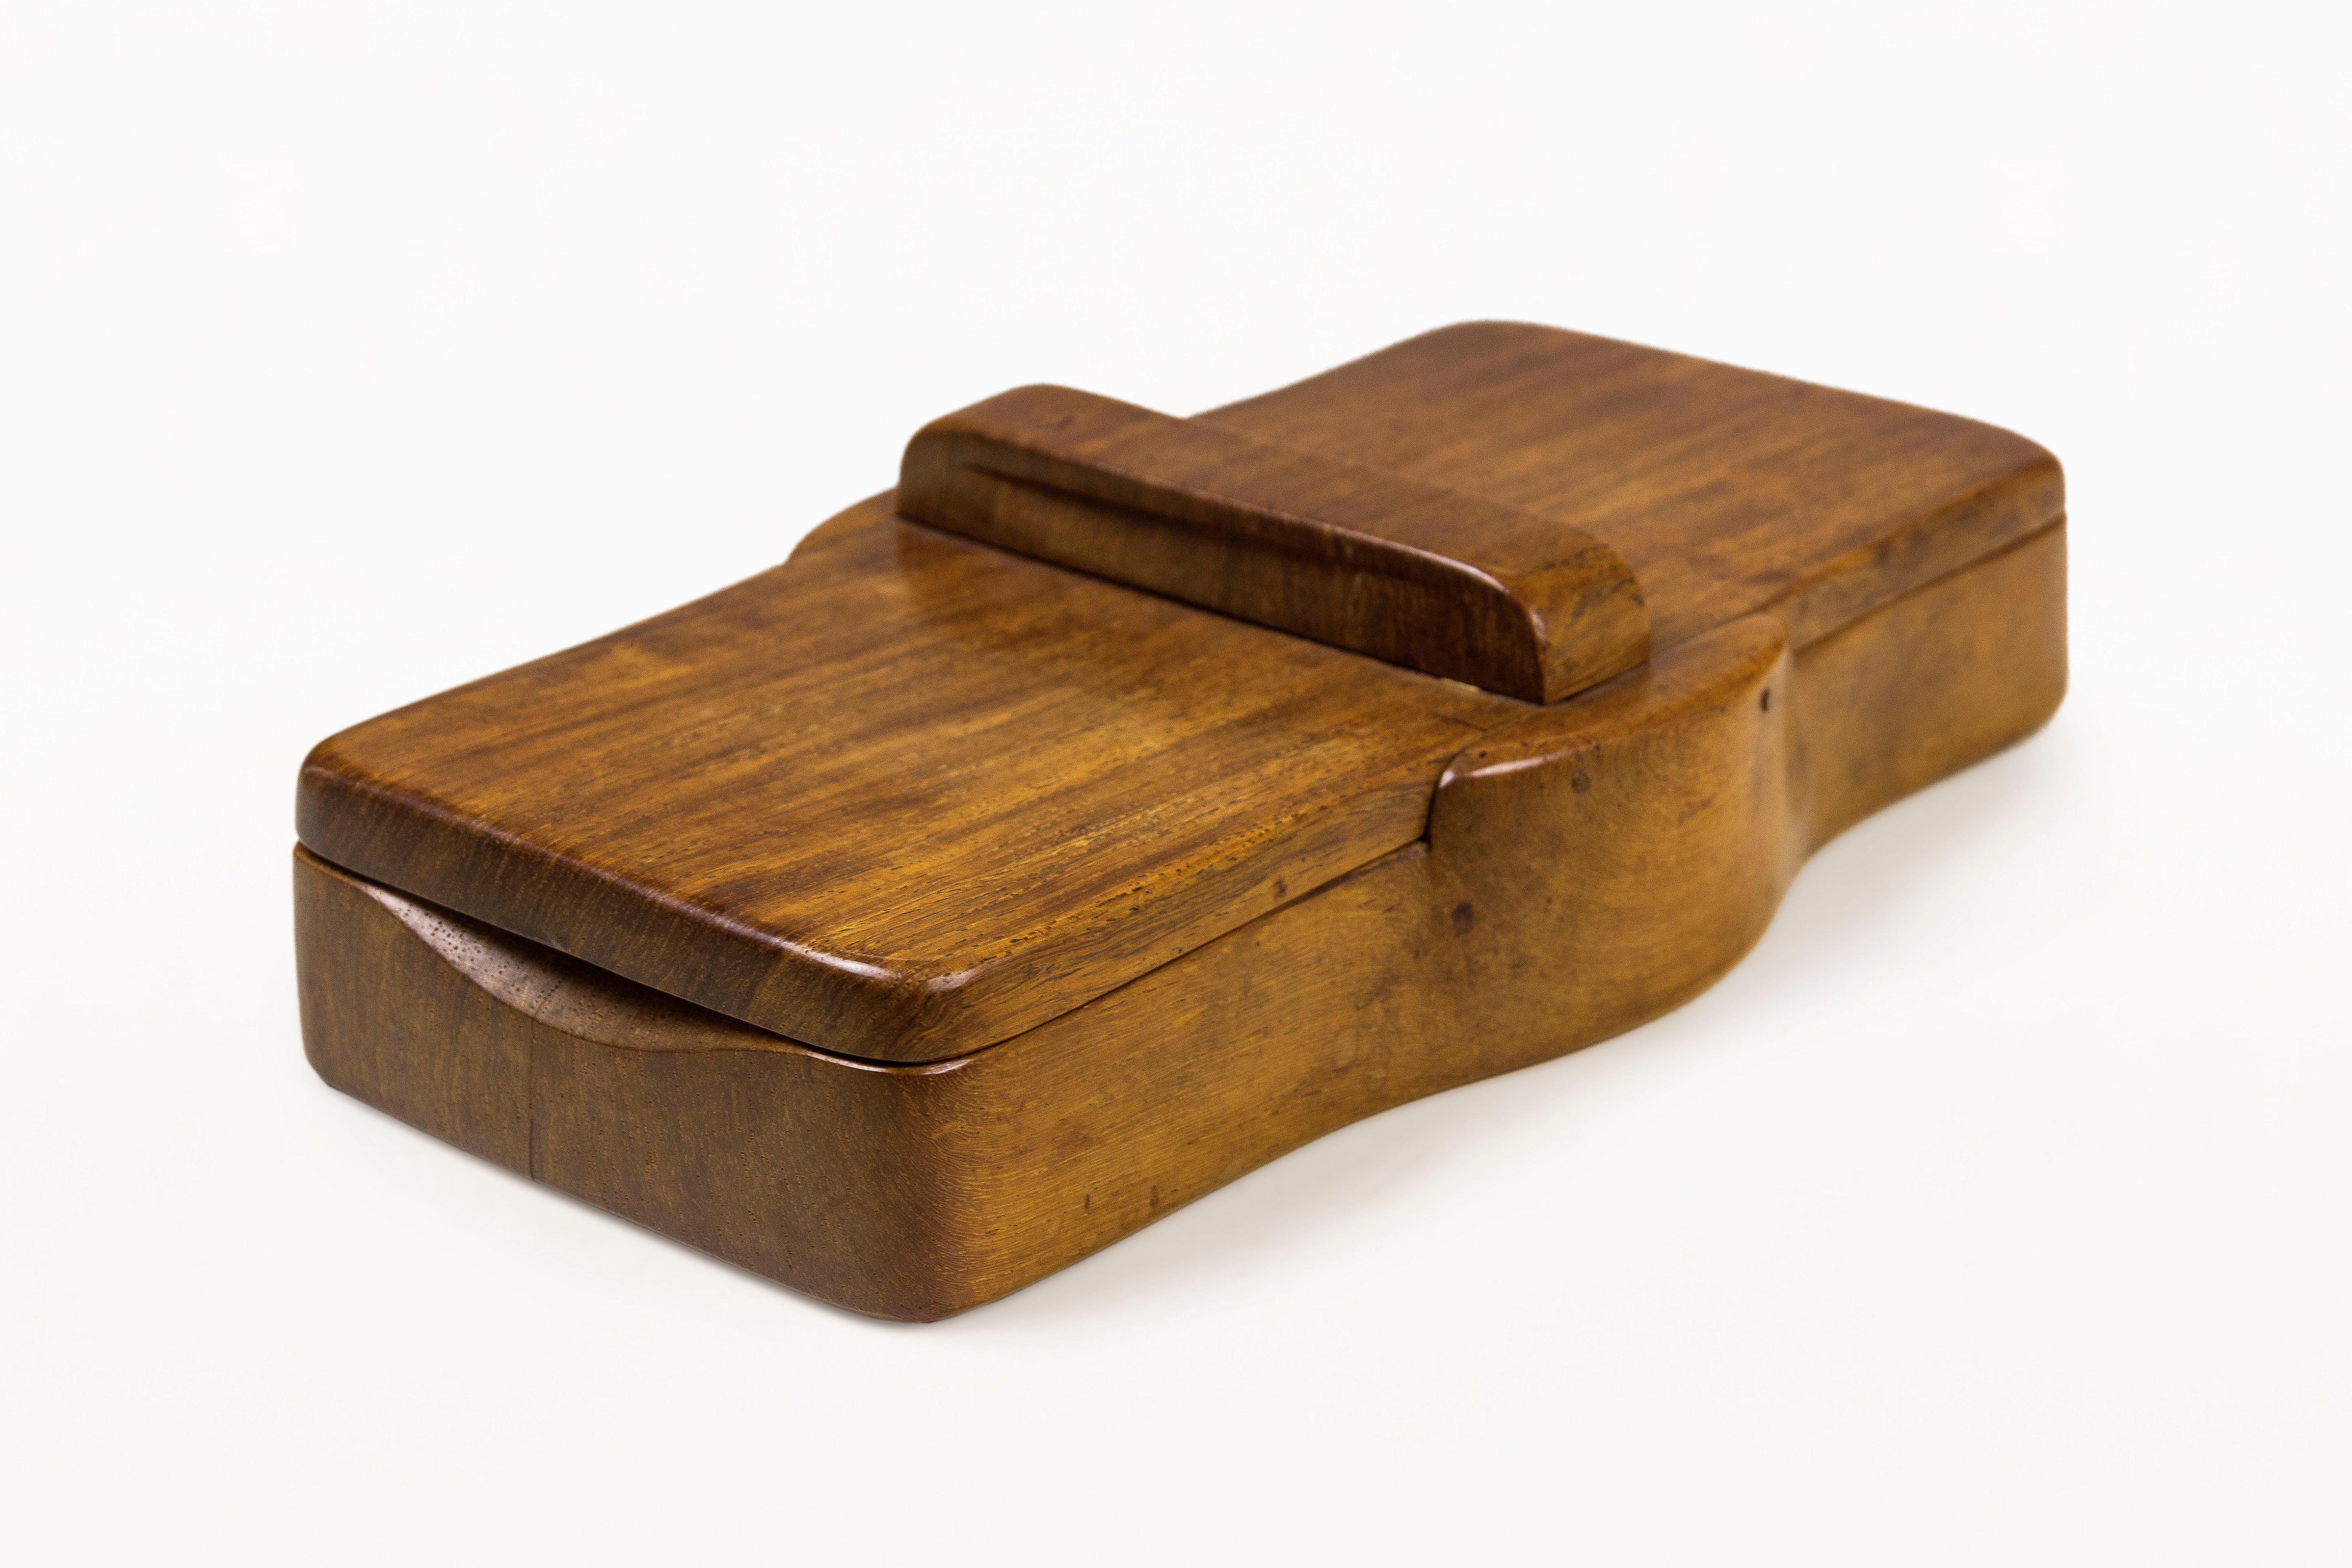 Alexandre Noll,
Wood box,
Double opening and central handle,
circa 1960, France.

Measures: Width 26 cm, depth 15 cm, height 6 cm.